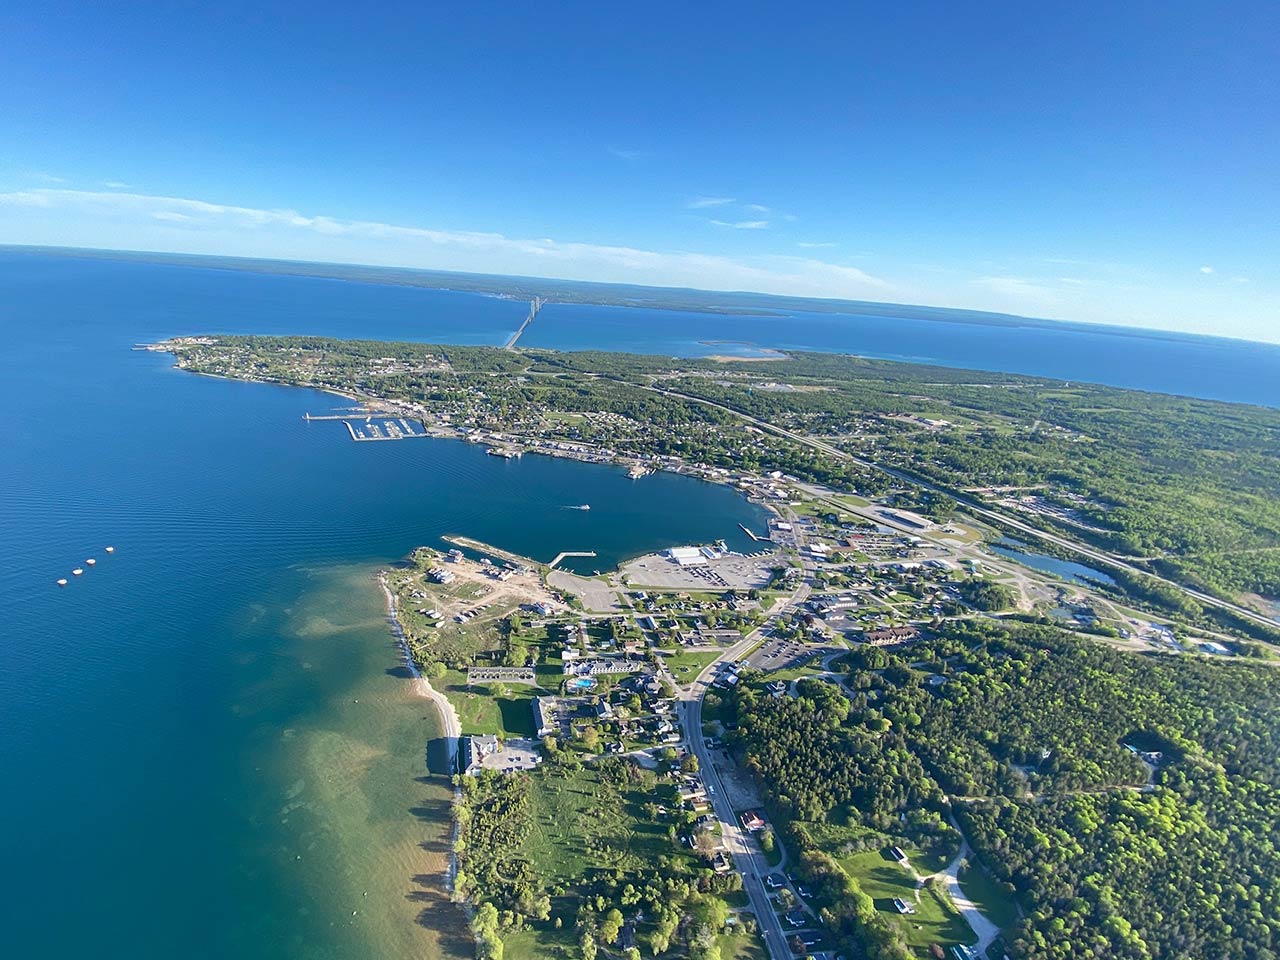 Helicopter view of St. Ignace bay